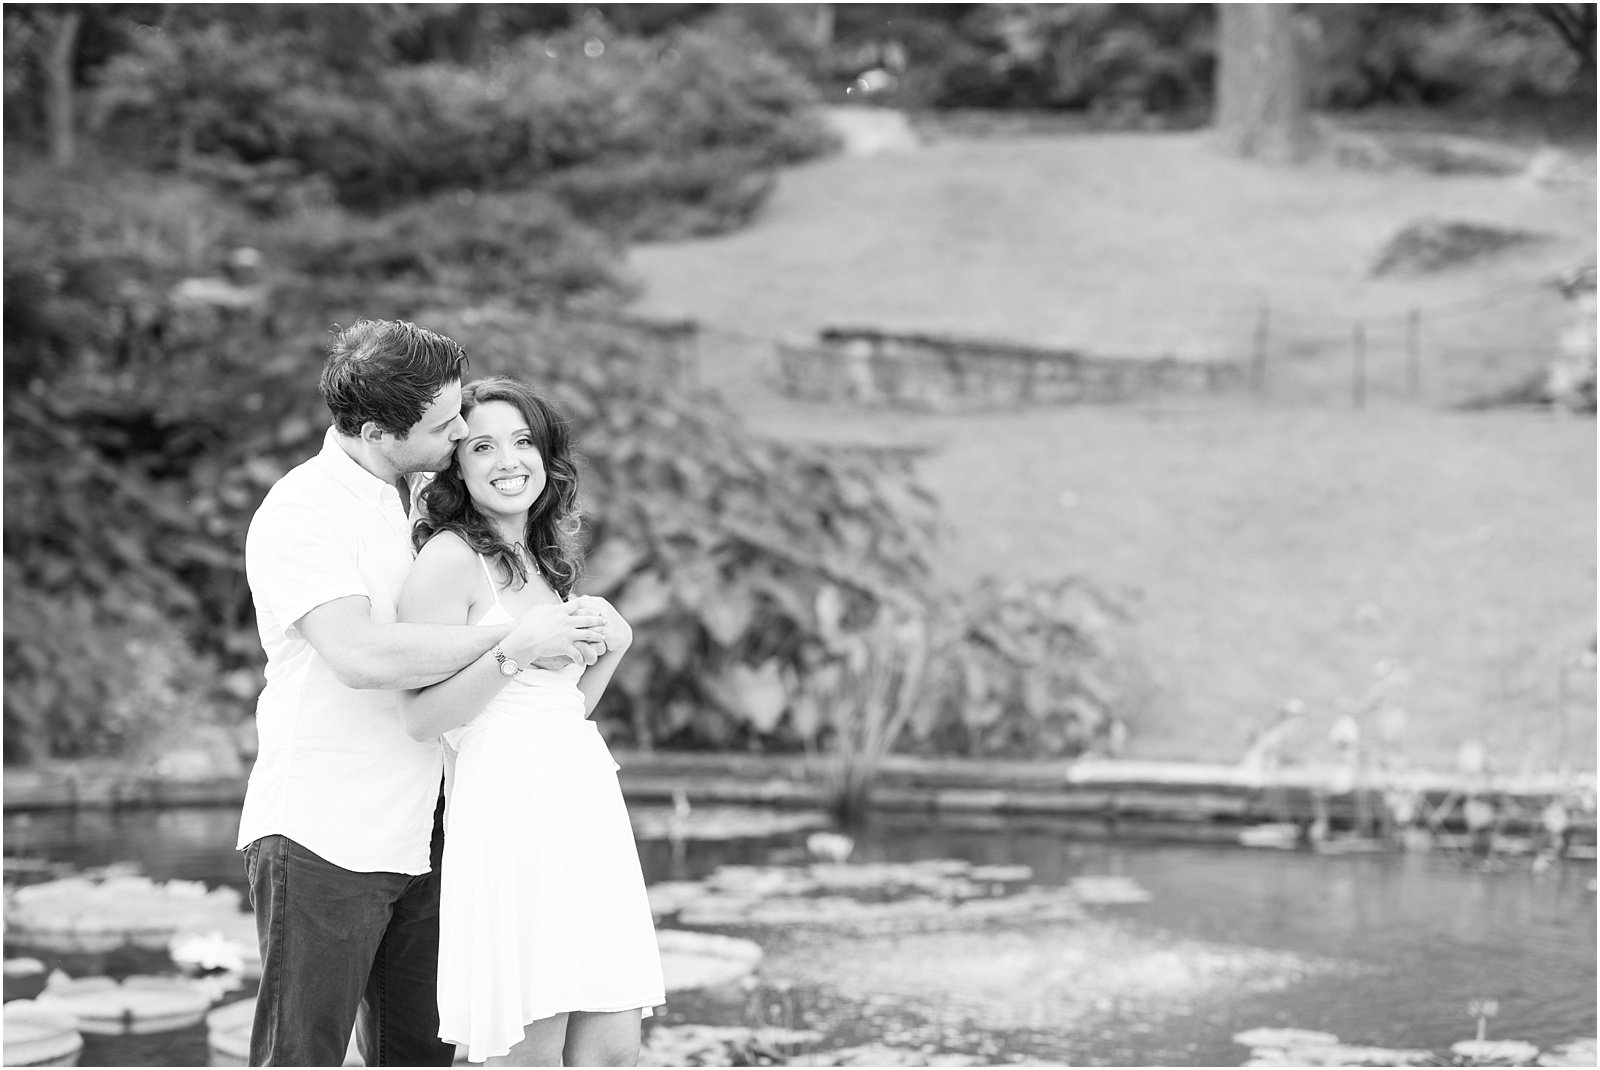 groom kissing bride on the forehead in front of a koi pond with arms wrapped around each other at Sarah P Duke Gardens